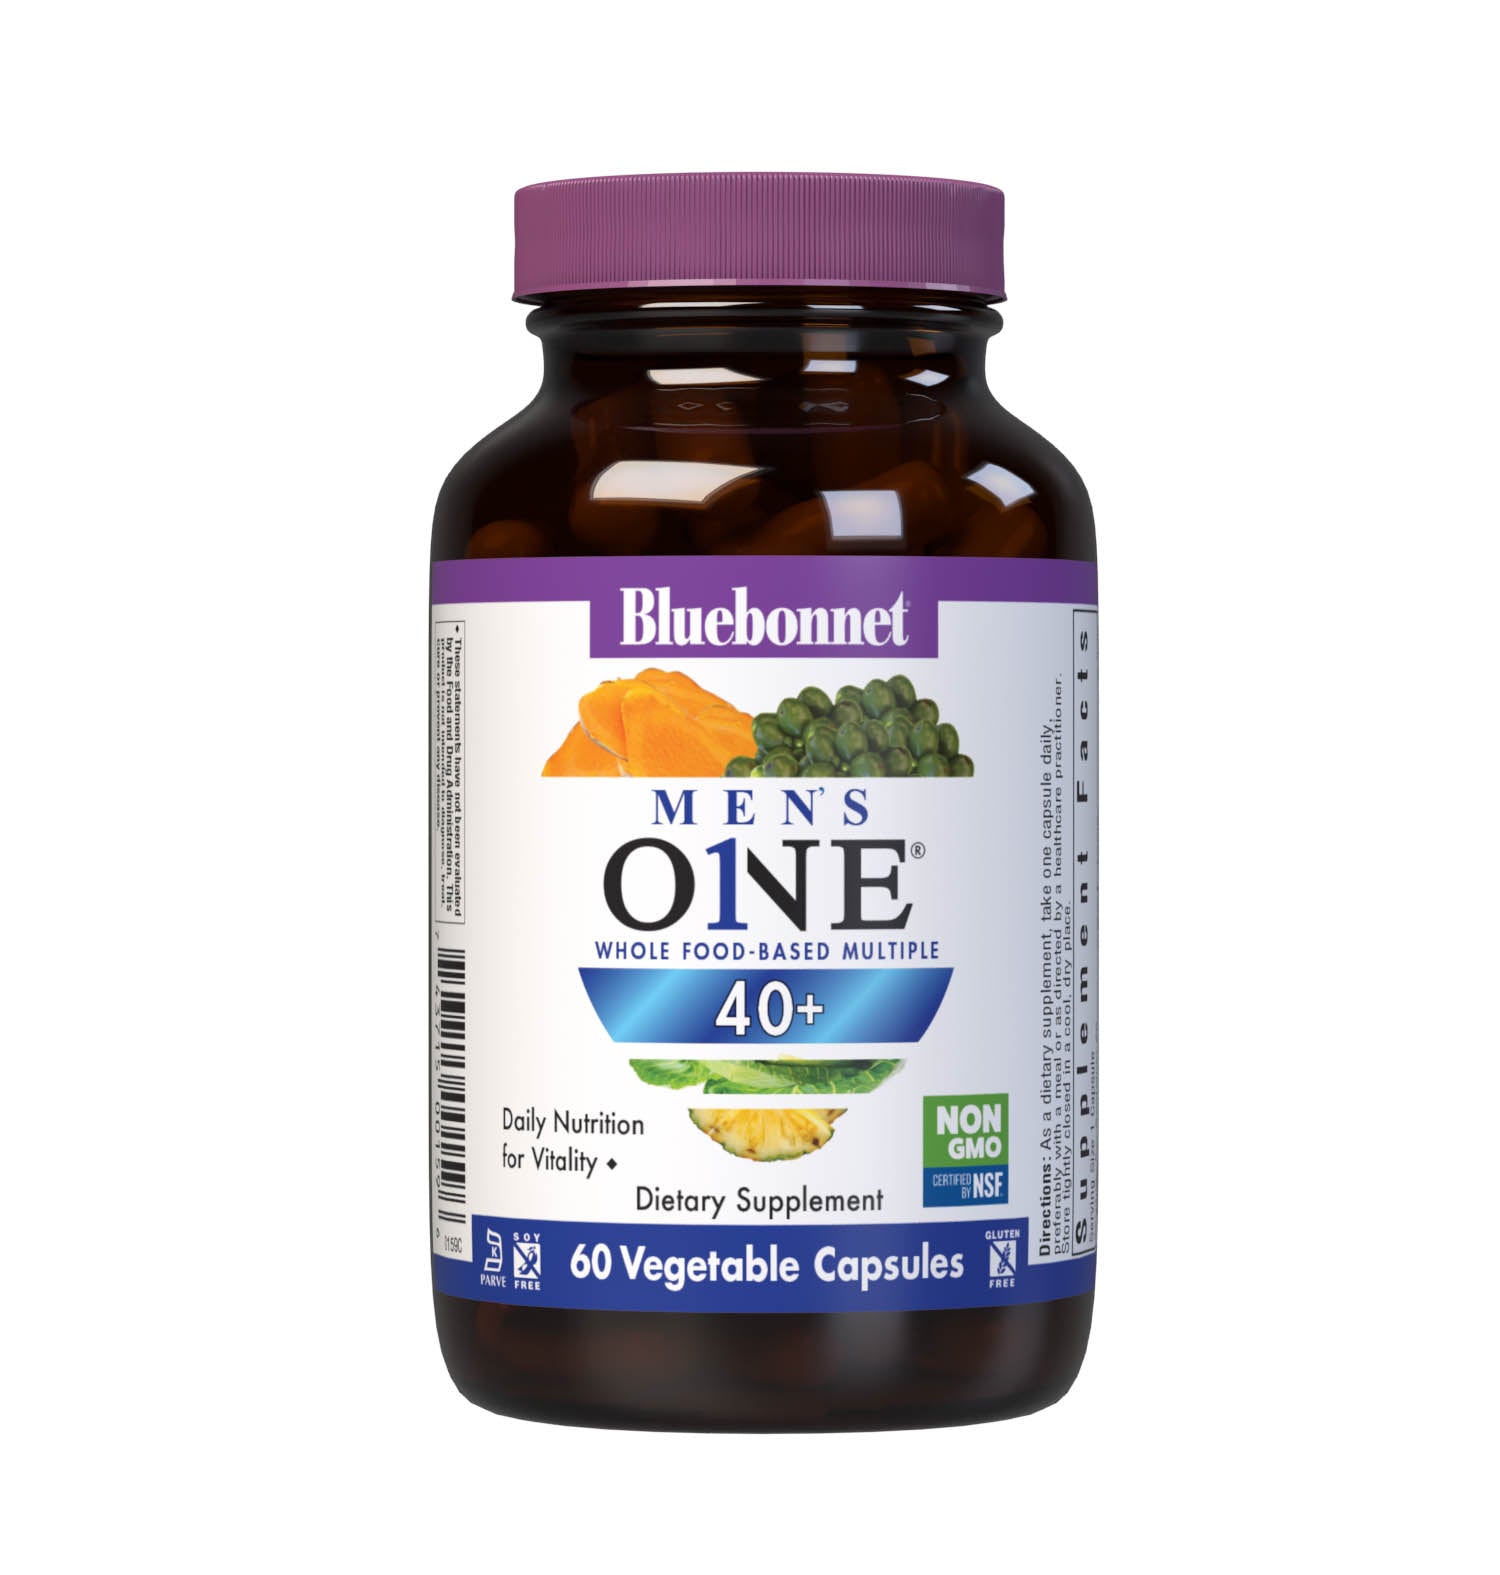 Bluebonnet’s Men’s ONE 40+ Whole Food-Based Multiple 60 Vegetable Capsules are formulated for daily nutritional support and vitality for men over 40, helping to increase energy and vitality, aid joint comfort, maintain prostate health, and support heart health. #size_60 count